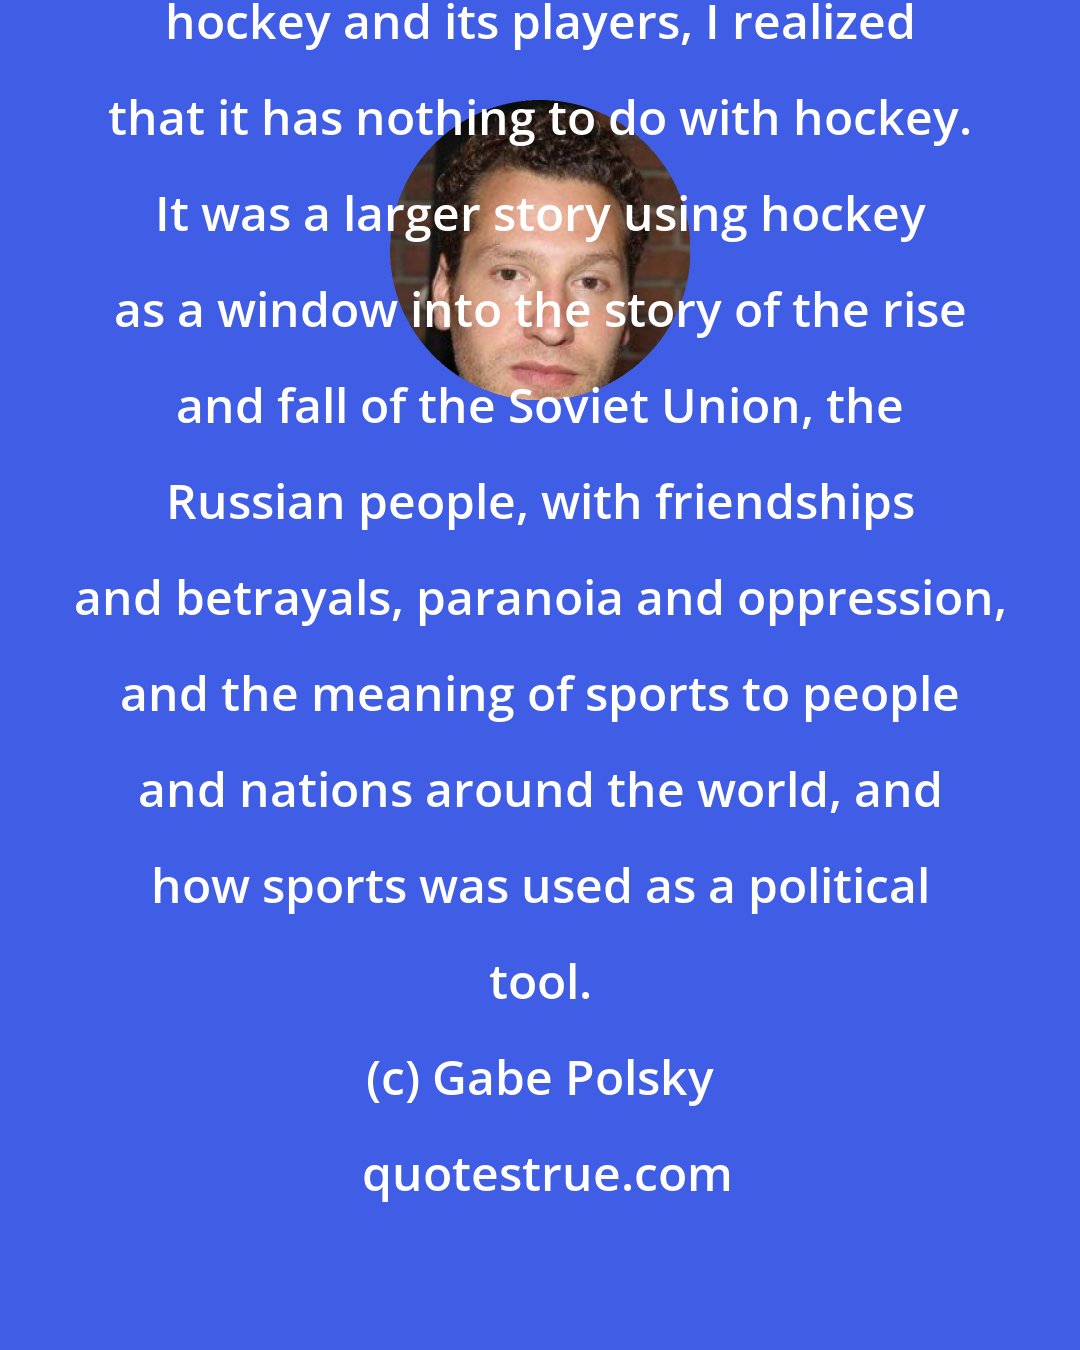 Gabe Polsky: When I looked into the story of Soviet hockey and its players, I realized that it has nothing to do with hockey. It was a larger story using hockey as a window into the story of the rise and fall of the Soviet Union, the Russian people, with friendships and betrayals, paranoia and oppression, and the meaning of sports to people and nations around the world, and how sports was used as a political tool.